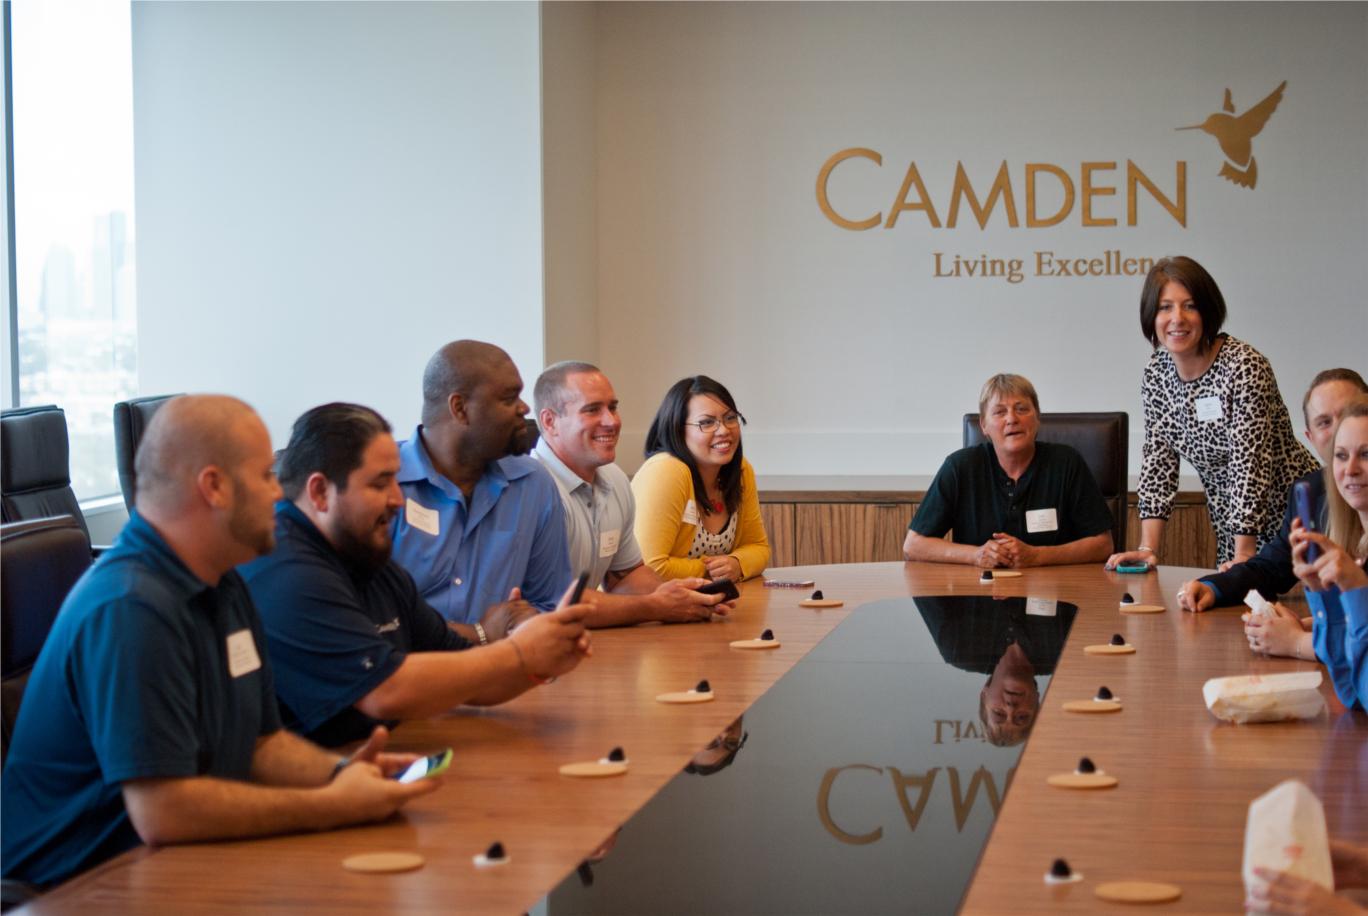 No. 5 midsize: Professional growth, work/life balance keep Camden a Top Workplace - Houston Chronicle